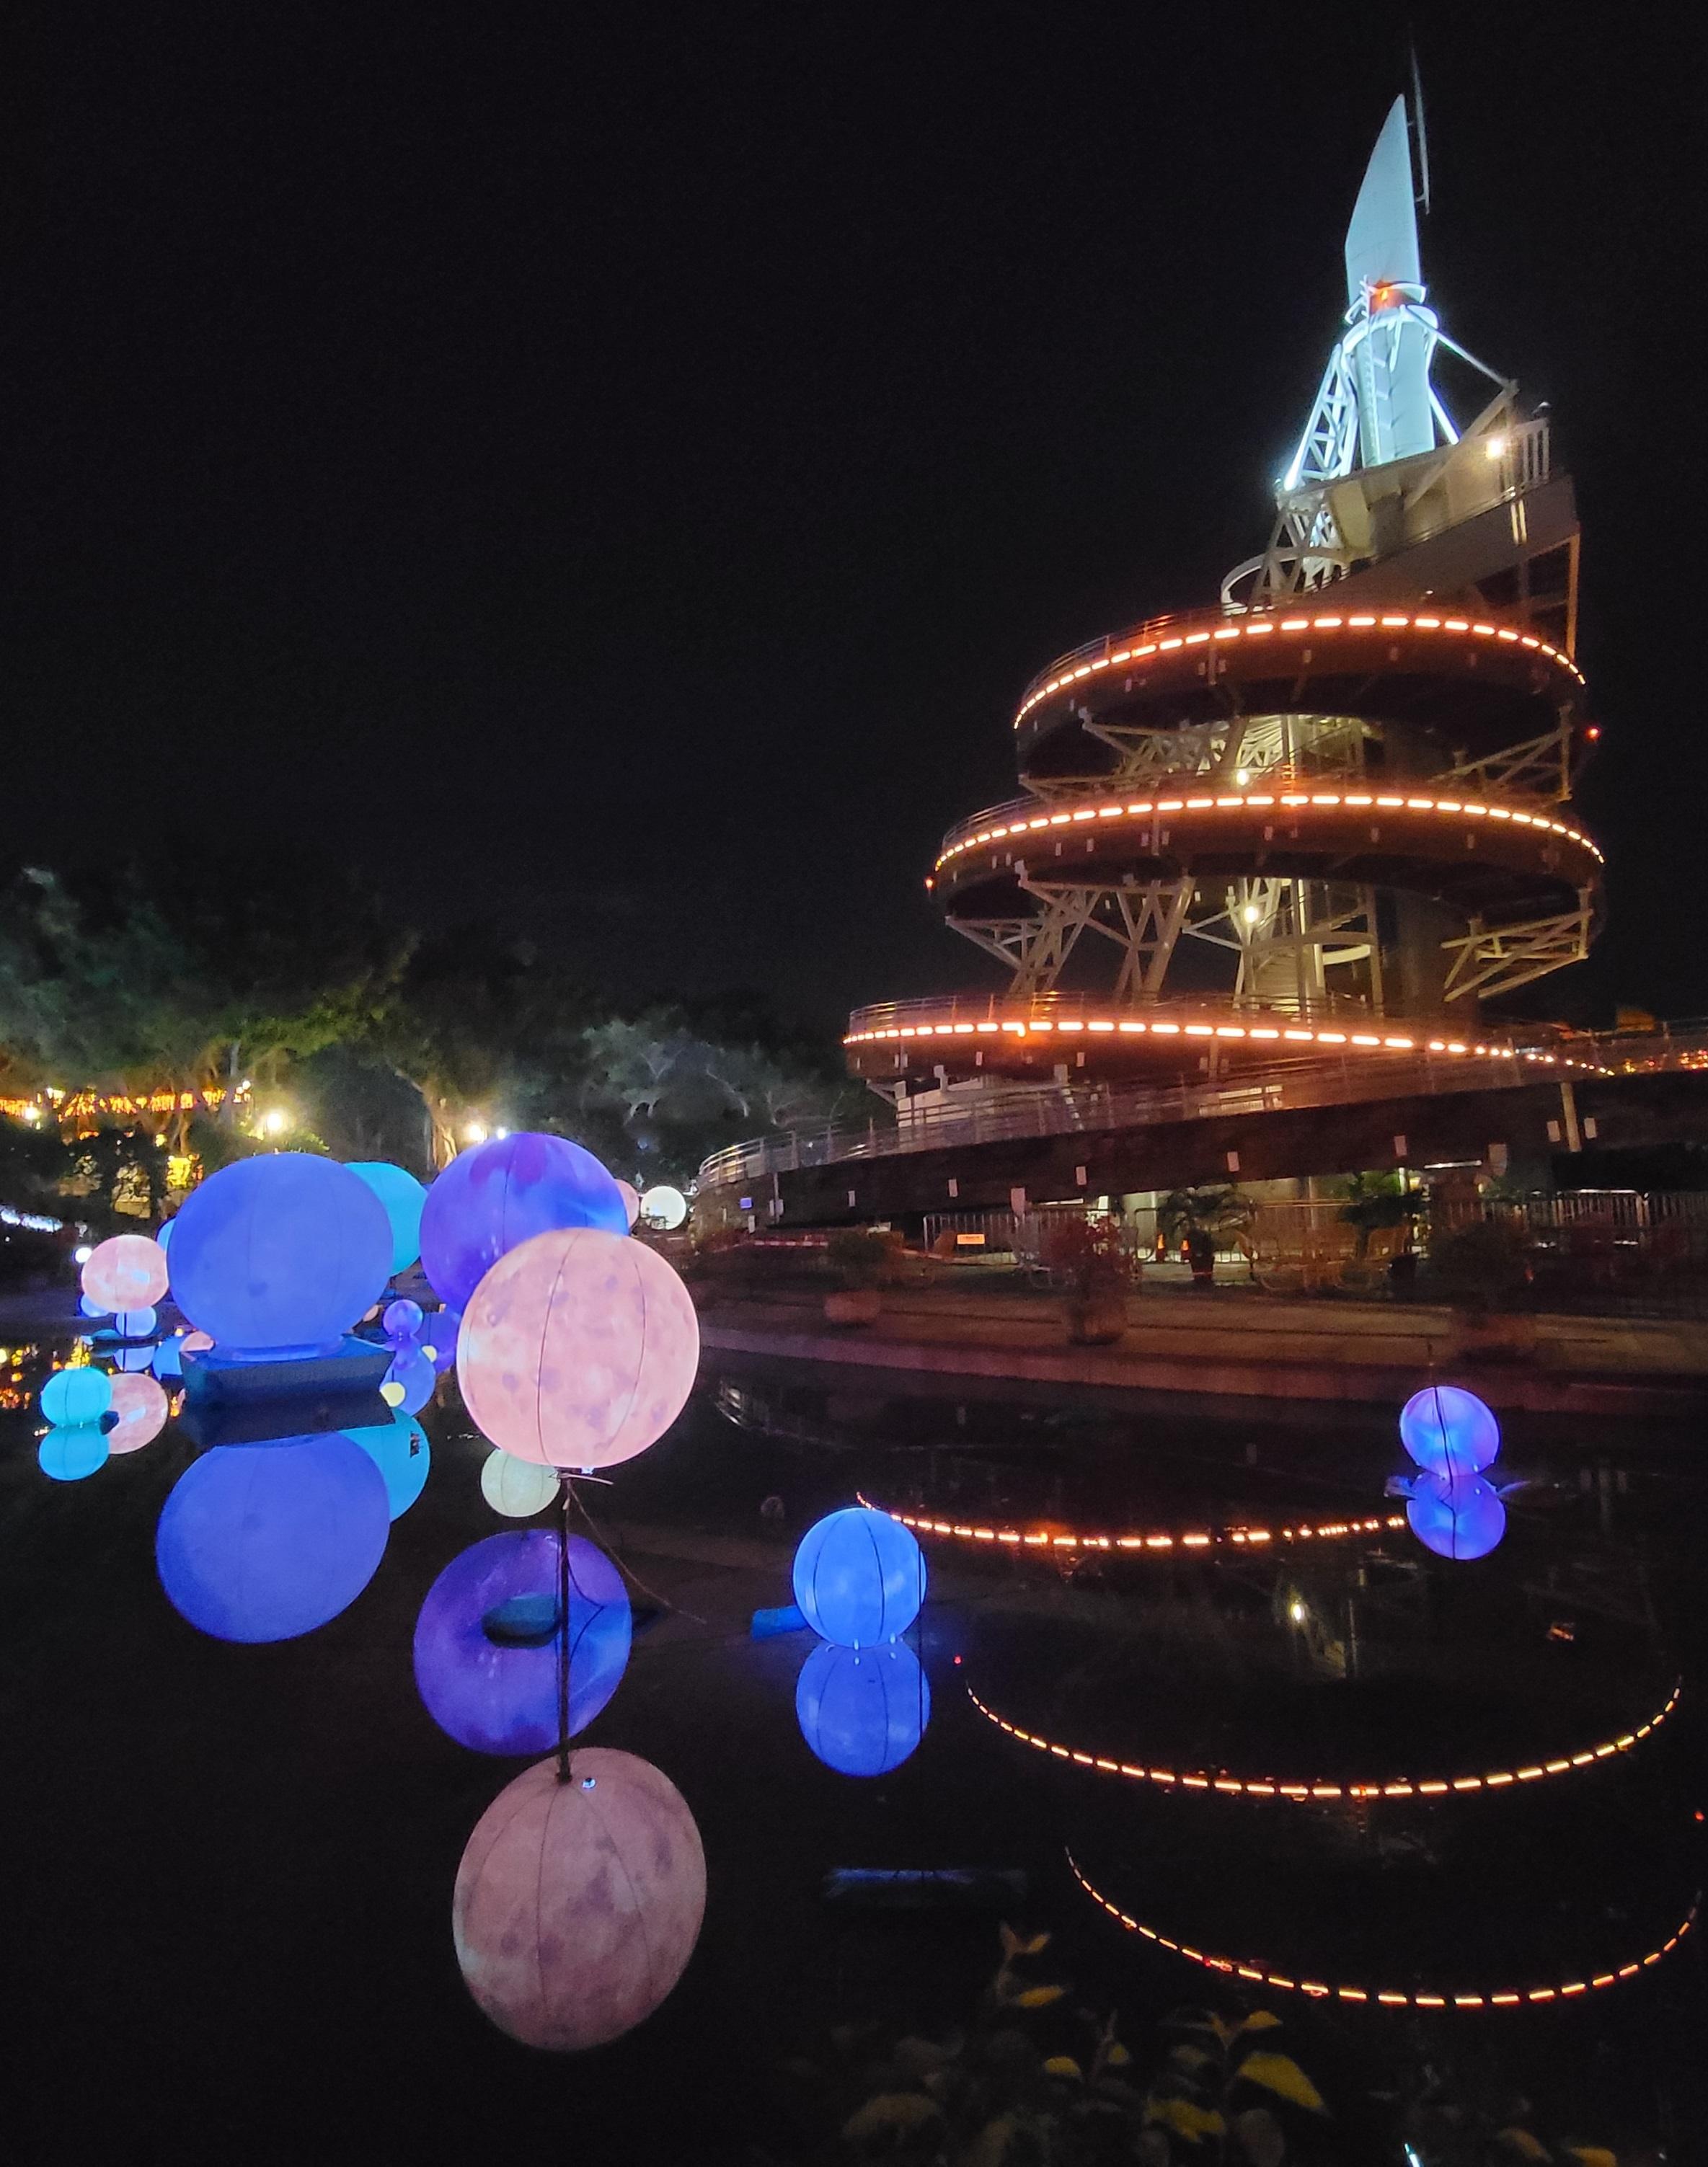 The Leisure and Cultural Services Department will hold the 2022 Mid-Autumn Lantern Displays from September 7 to 12 to enhance the festive atmosphere and celebrate the 25th anniversary of the establishment of the Hong Kong Special Administrative Region. Photo shows the lantern decorations at Tai Po Waterfront Park, featuring themes of "Round" and "Union" to symbolise reunions and togetherness among family and friends.
 

